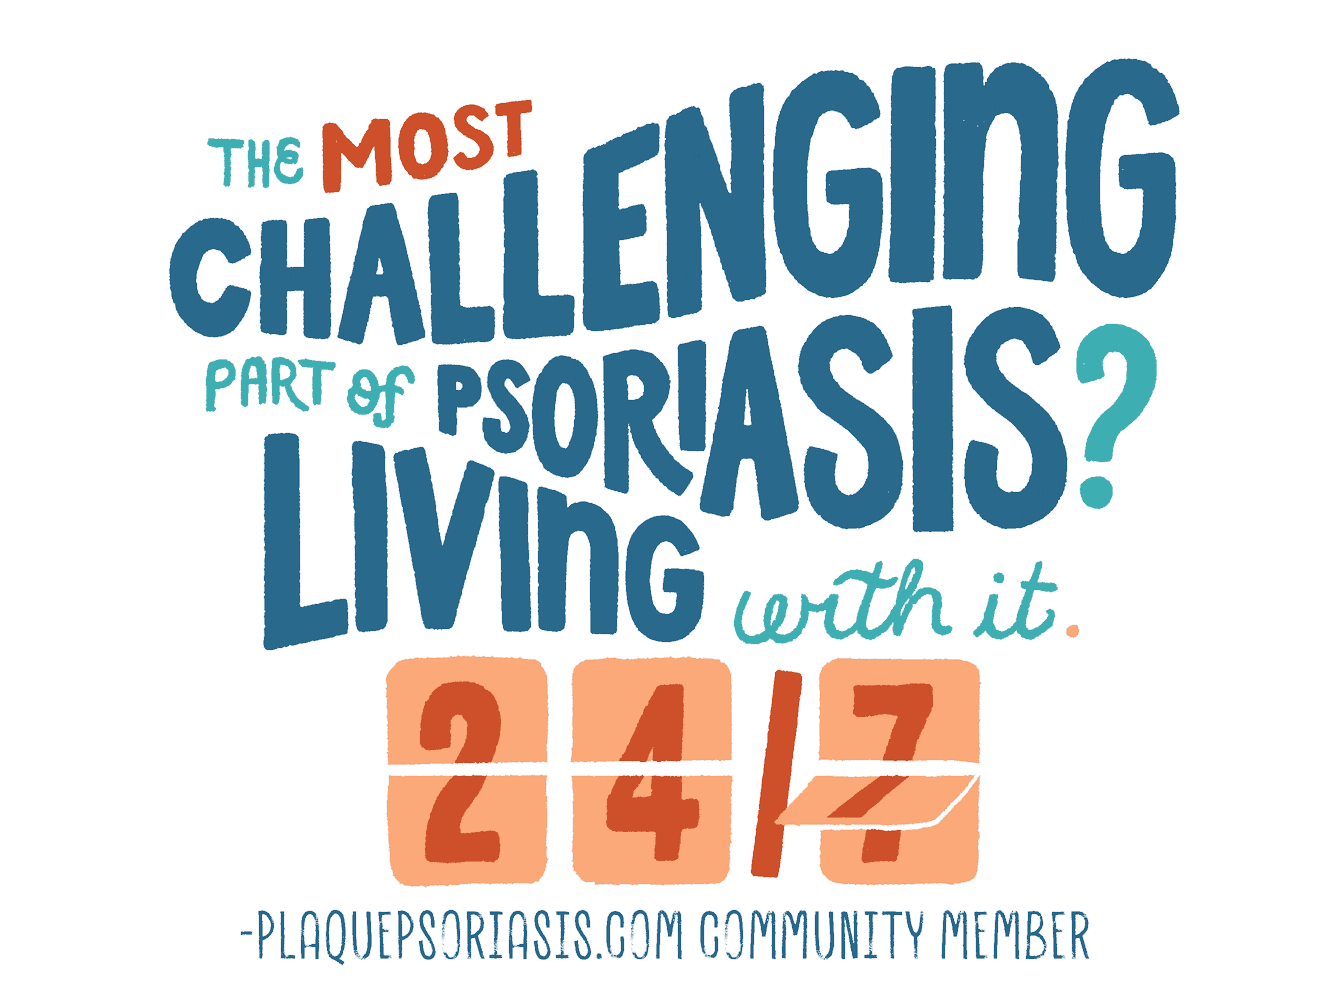 The most challenging part of psoriasis? Living with it 24 7. The 24 7 is a flipping clock face.